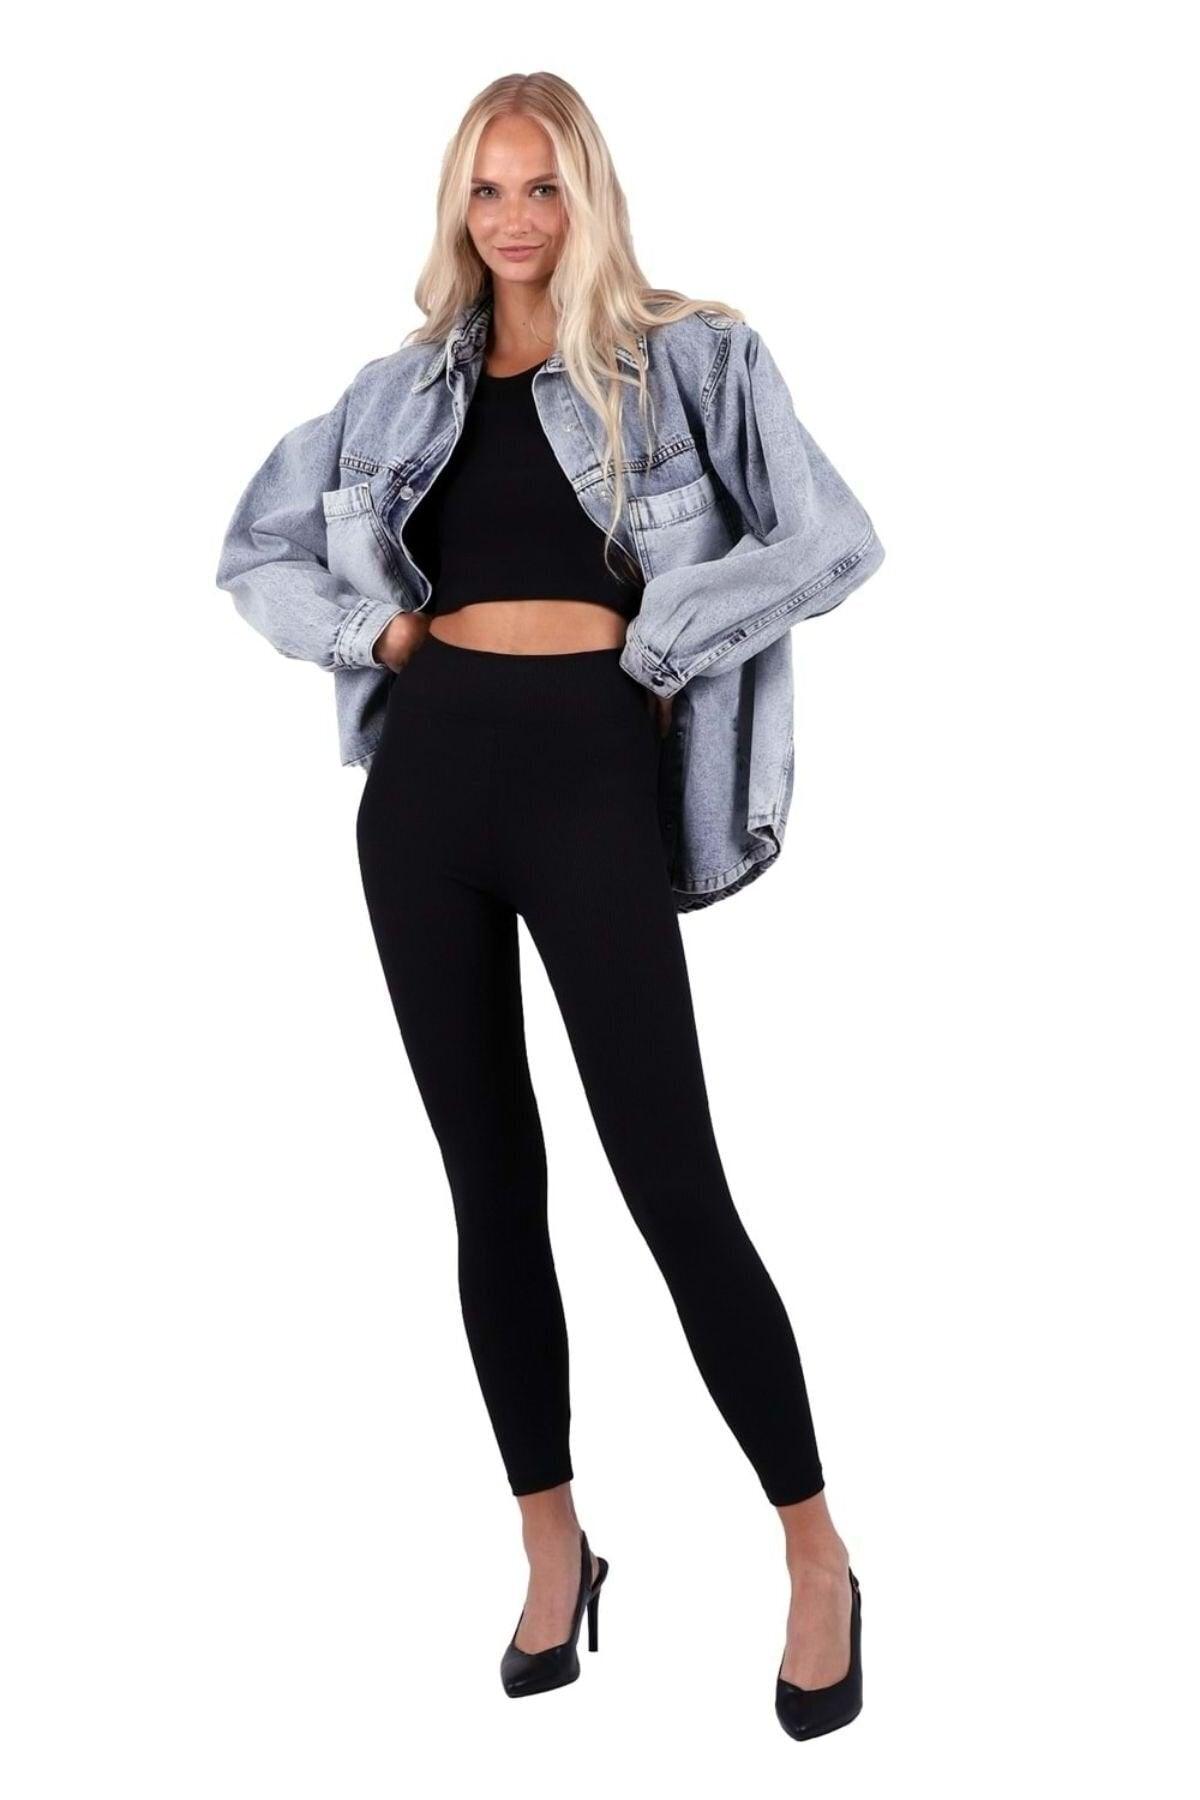 Multicolored Pocket And Long Sleeve Classic Collar Oversize Jeans Women's Jacket Cotton - Swordslife